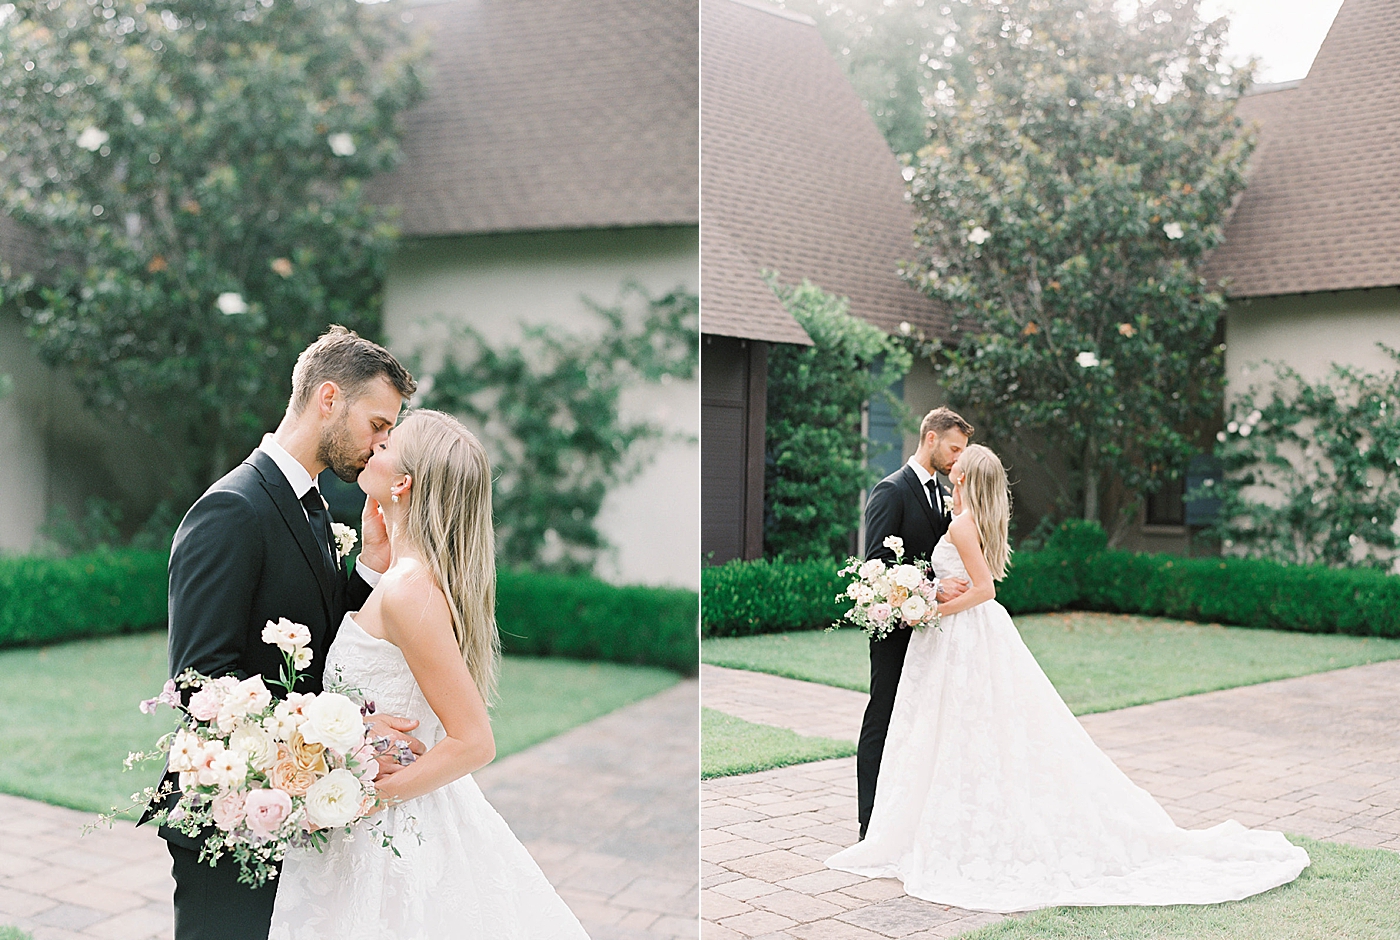 Bride and groom kiss during portraits | Charleston Photography Workshop with Carters Event Co